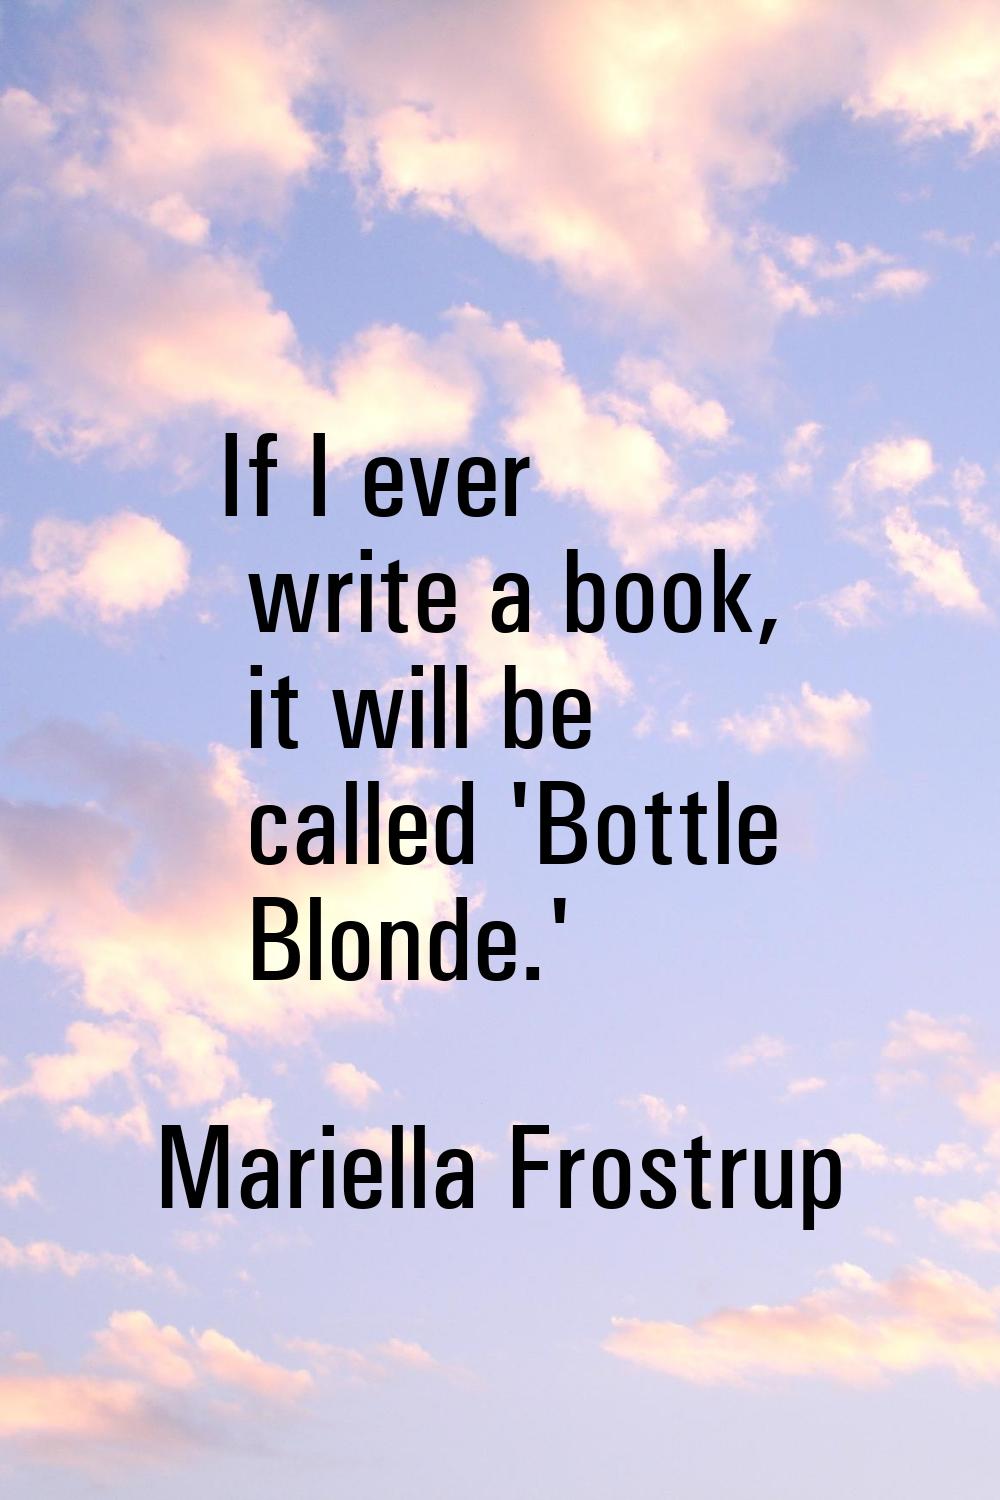 If I ever write a book, it will be called 'Bottle Blonde.'